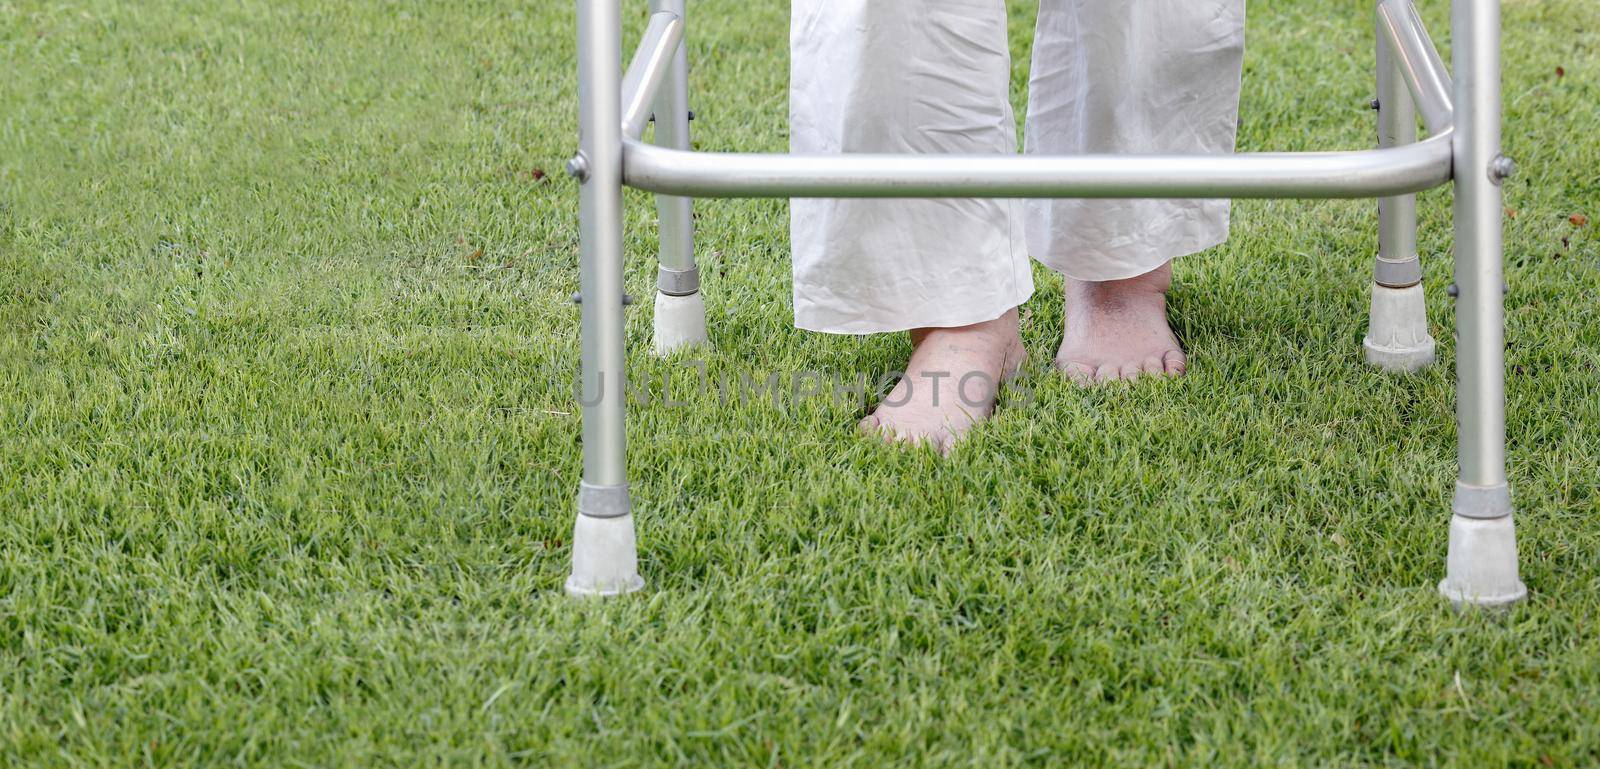 Elderly woman walking barefoot therapy on grass in backyard. by toa55